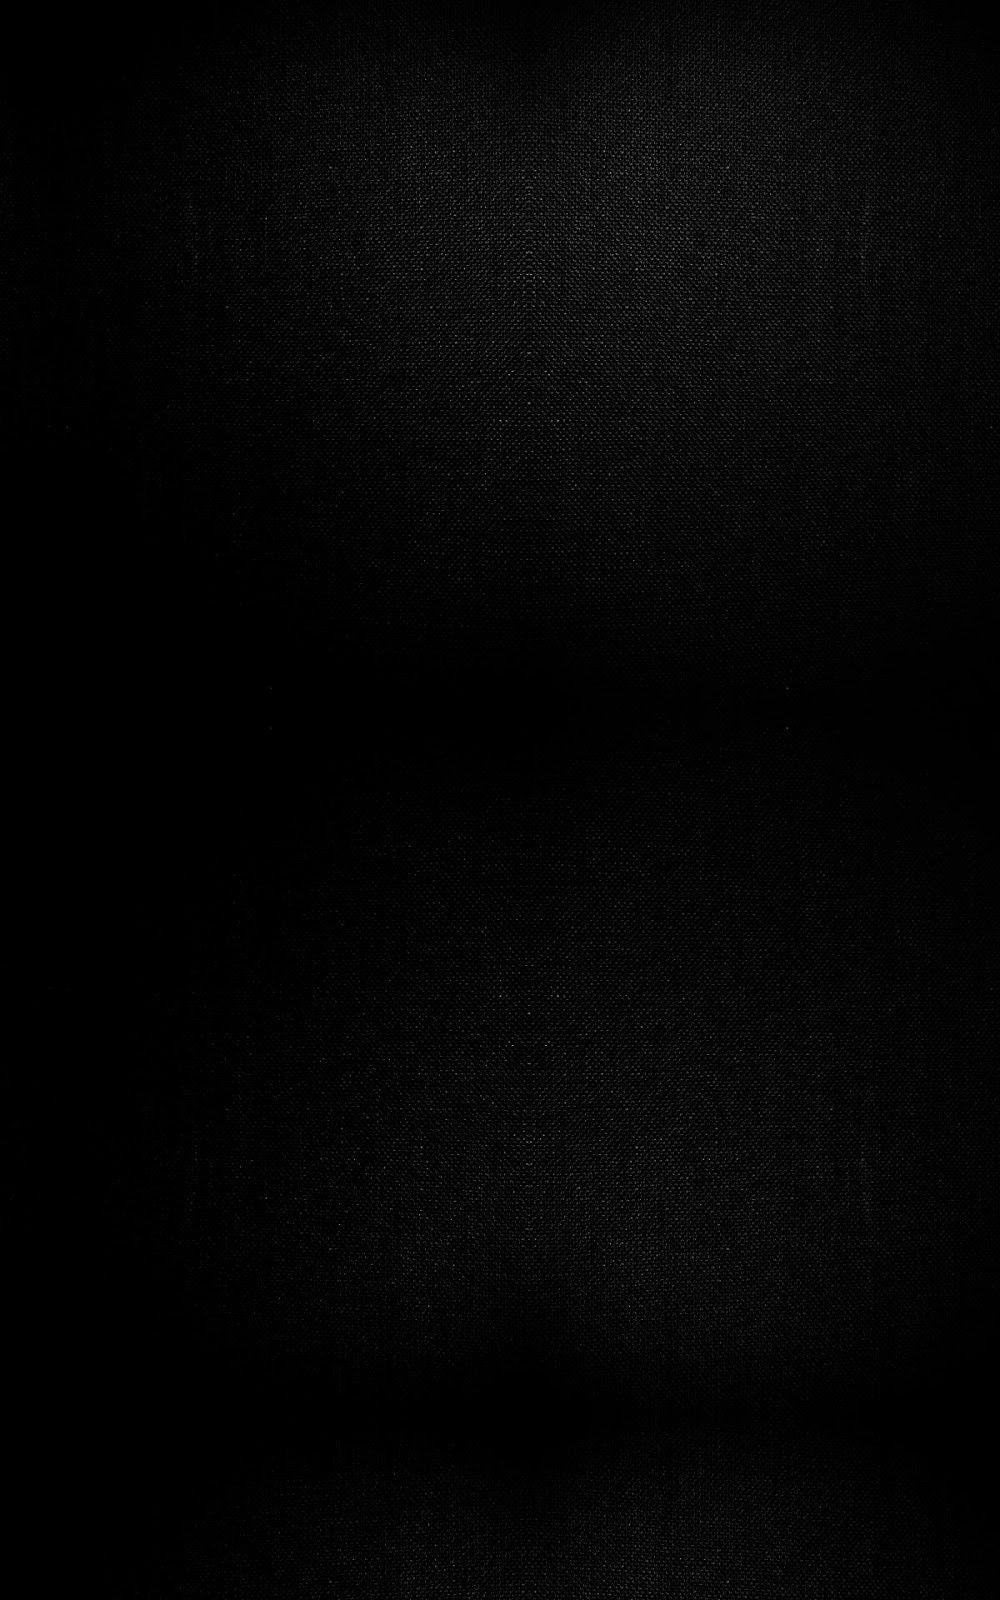 Solid Black iPhone Wallpaper Free Solid Black iPhone Background